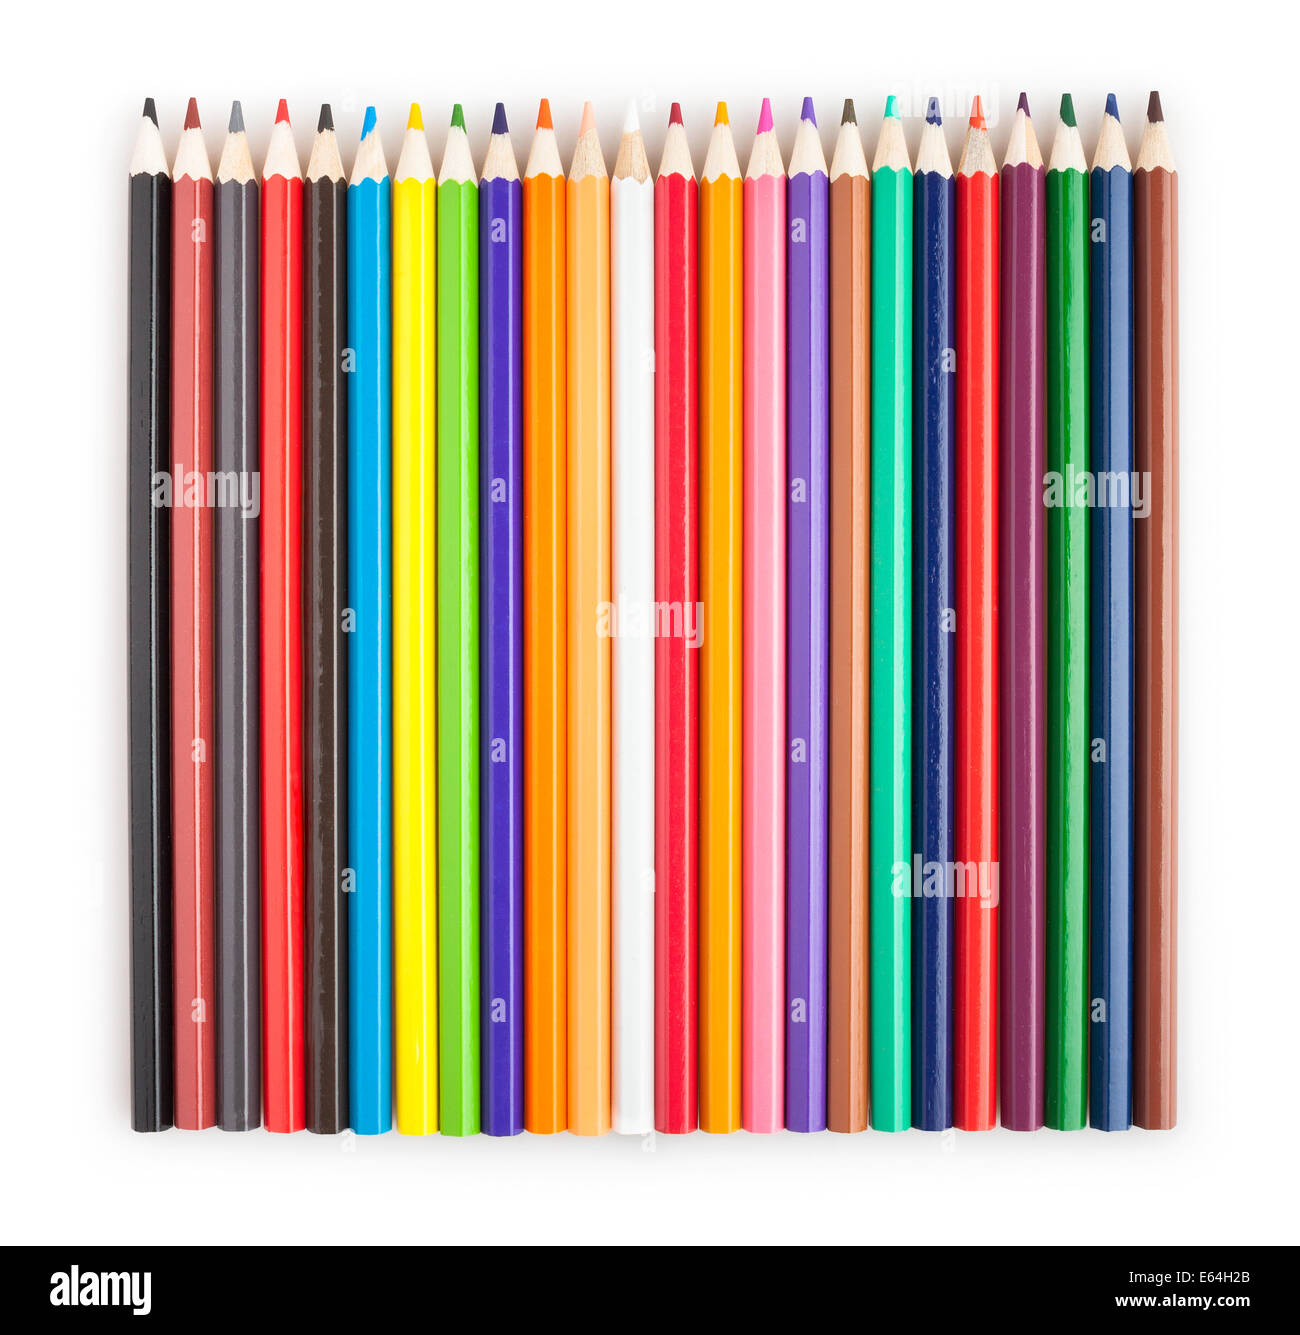 color pencils isolated Stock Photo